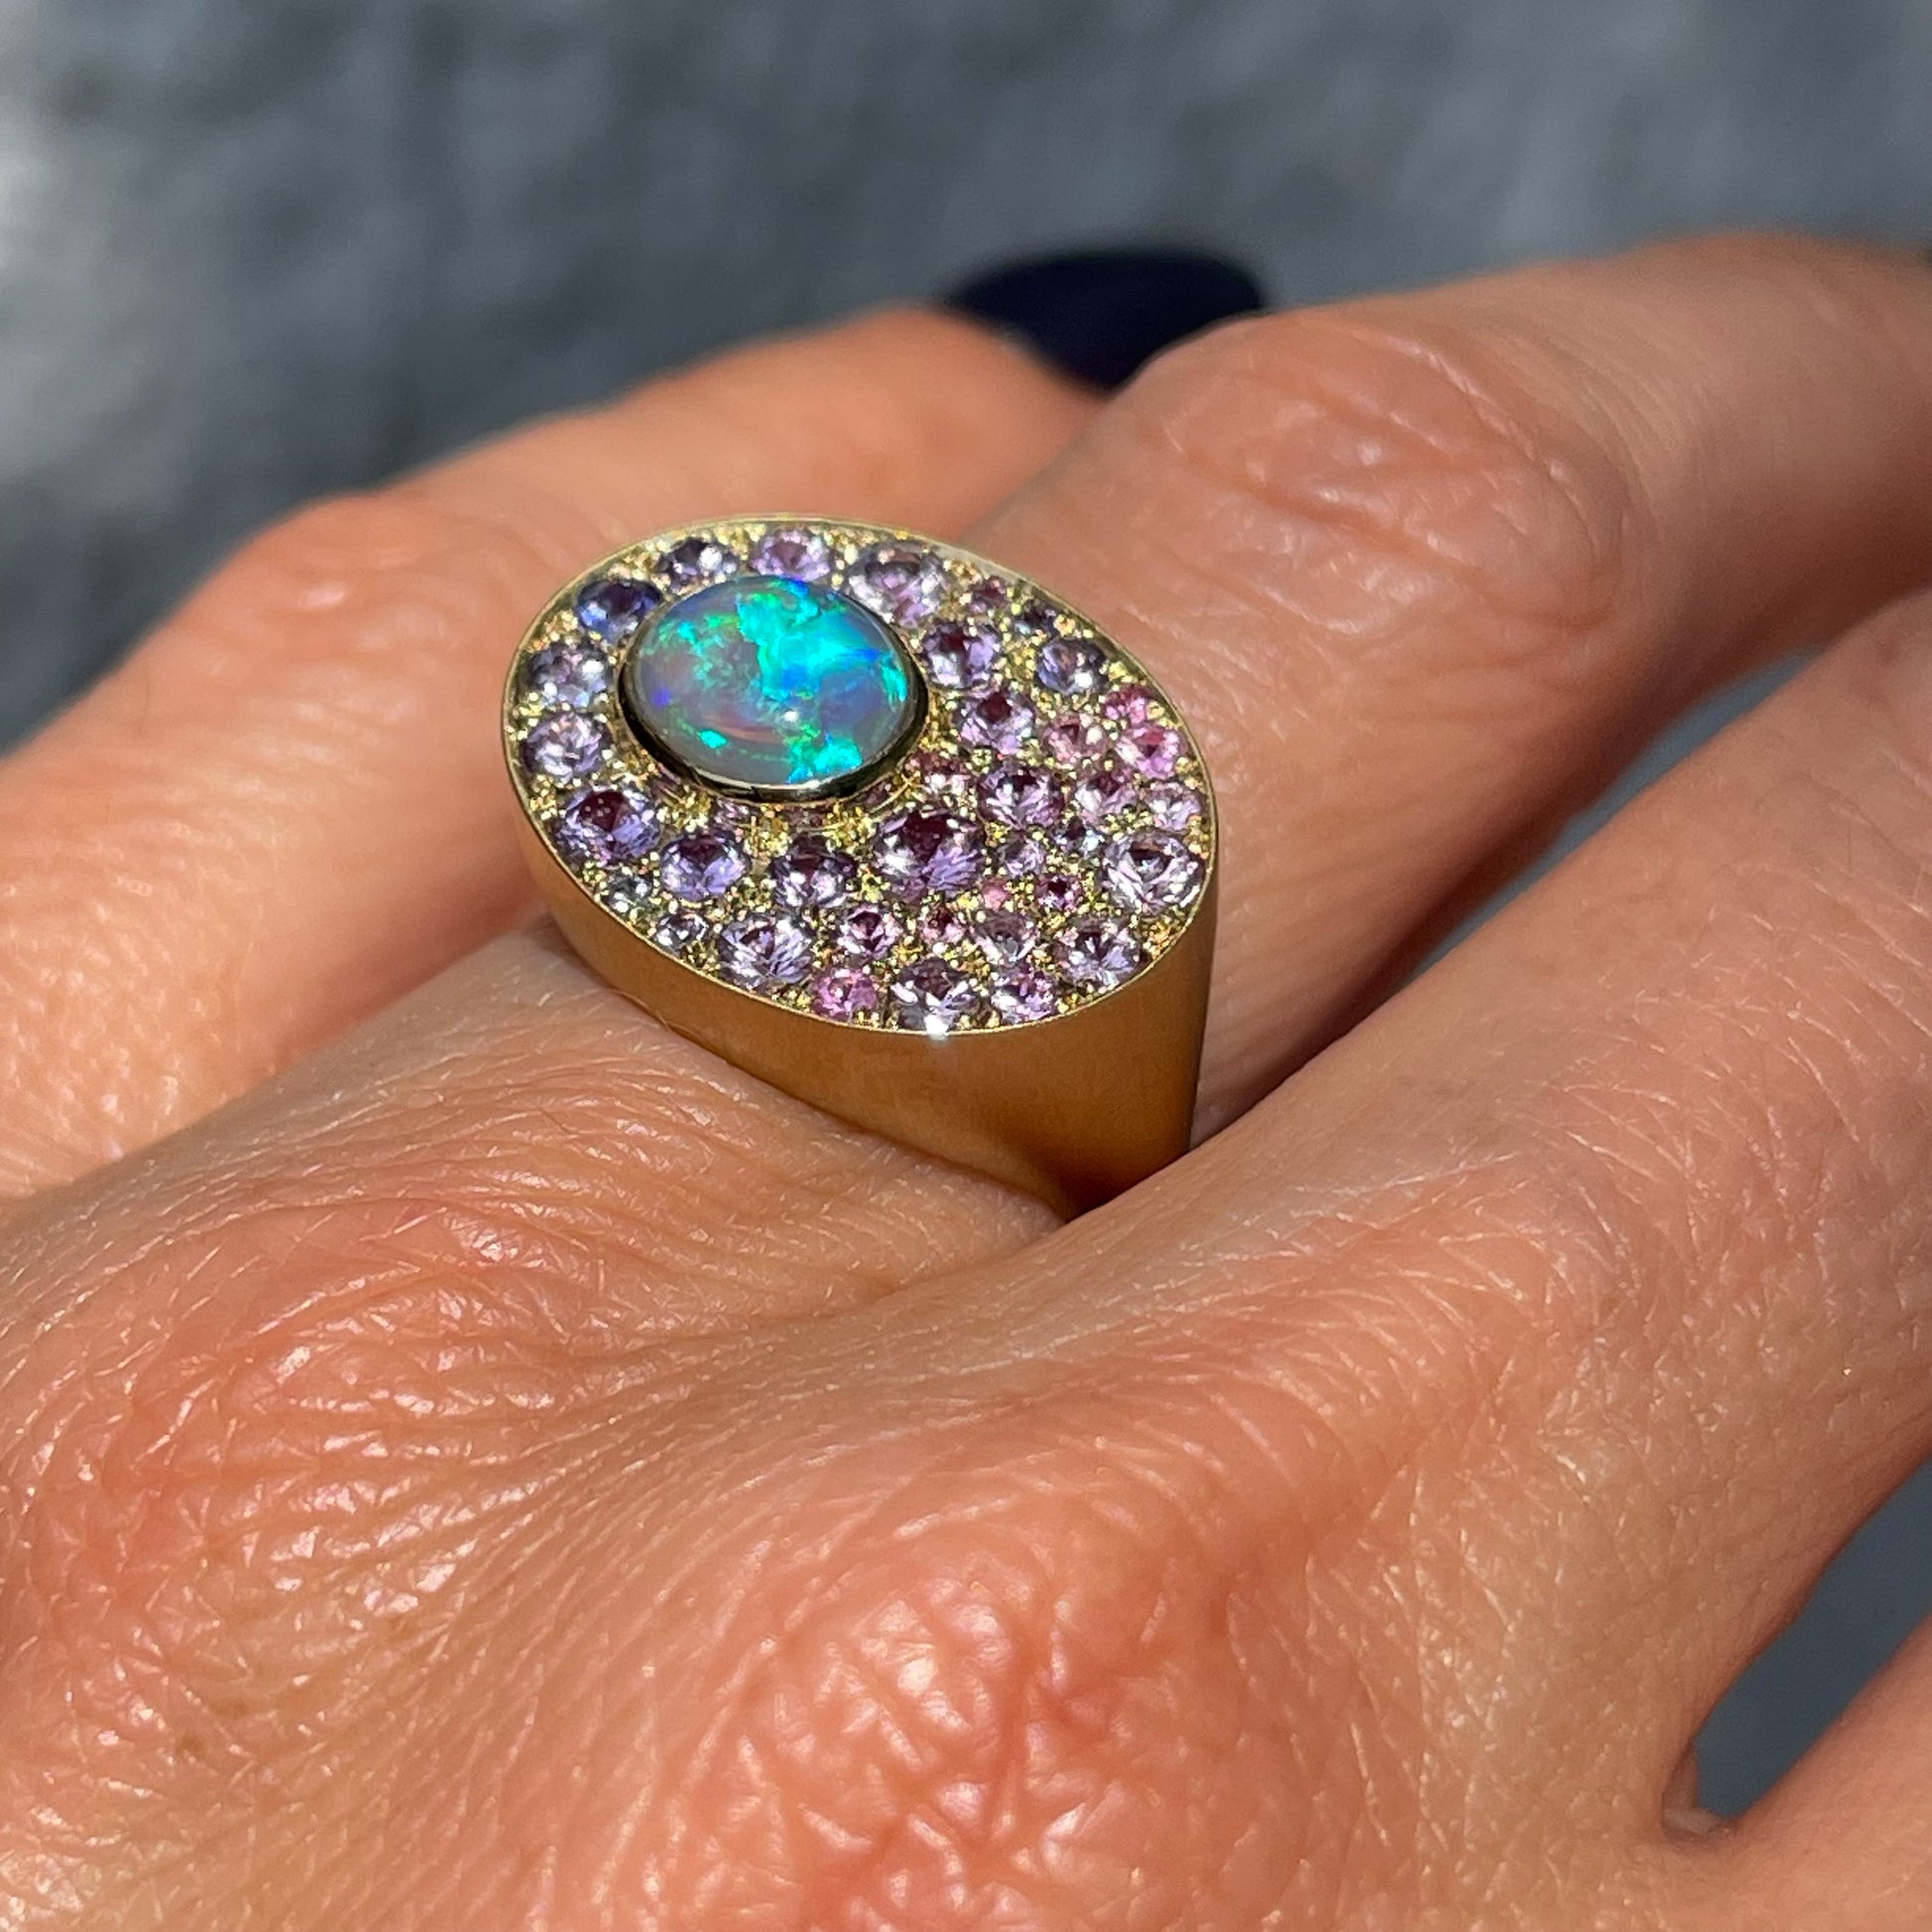 An Australian Opal Ring by NIXIN Jewelry is modeled on the hand and shown up close. Artisan jewelry made with sapphires and opal set in gold.